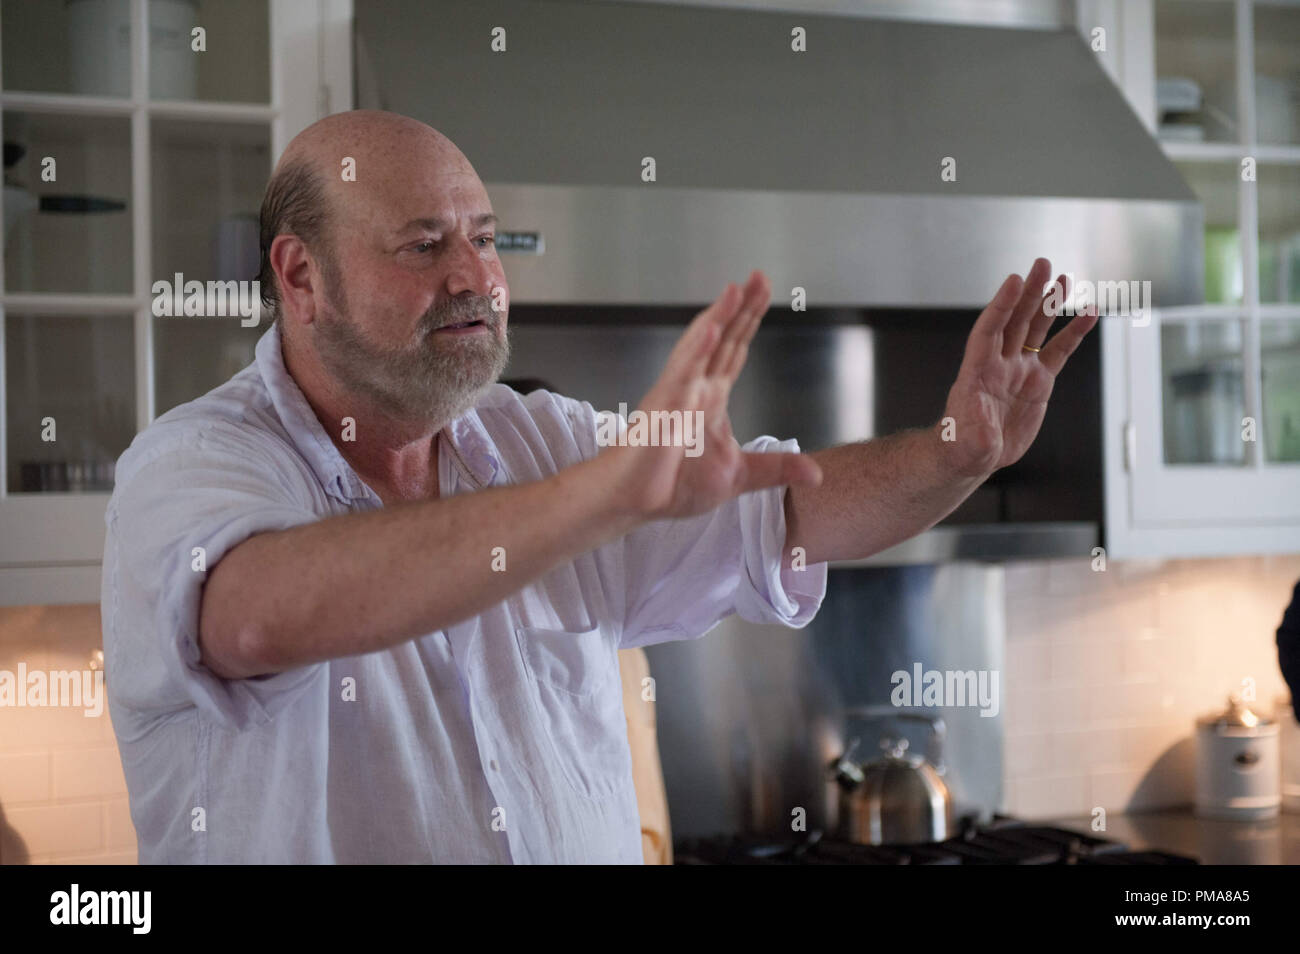 Behind the scenes: Director Rob Reiner sets up a shot on the Connecticut set of AND SO IT GOES. Stock Photo